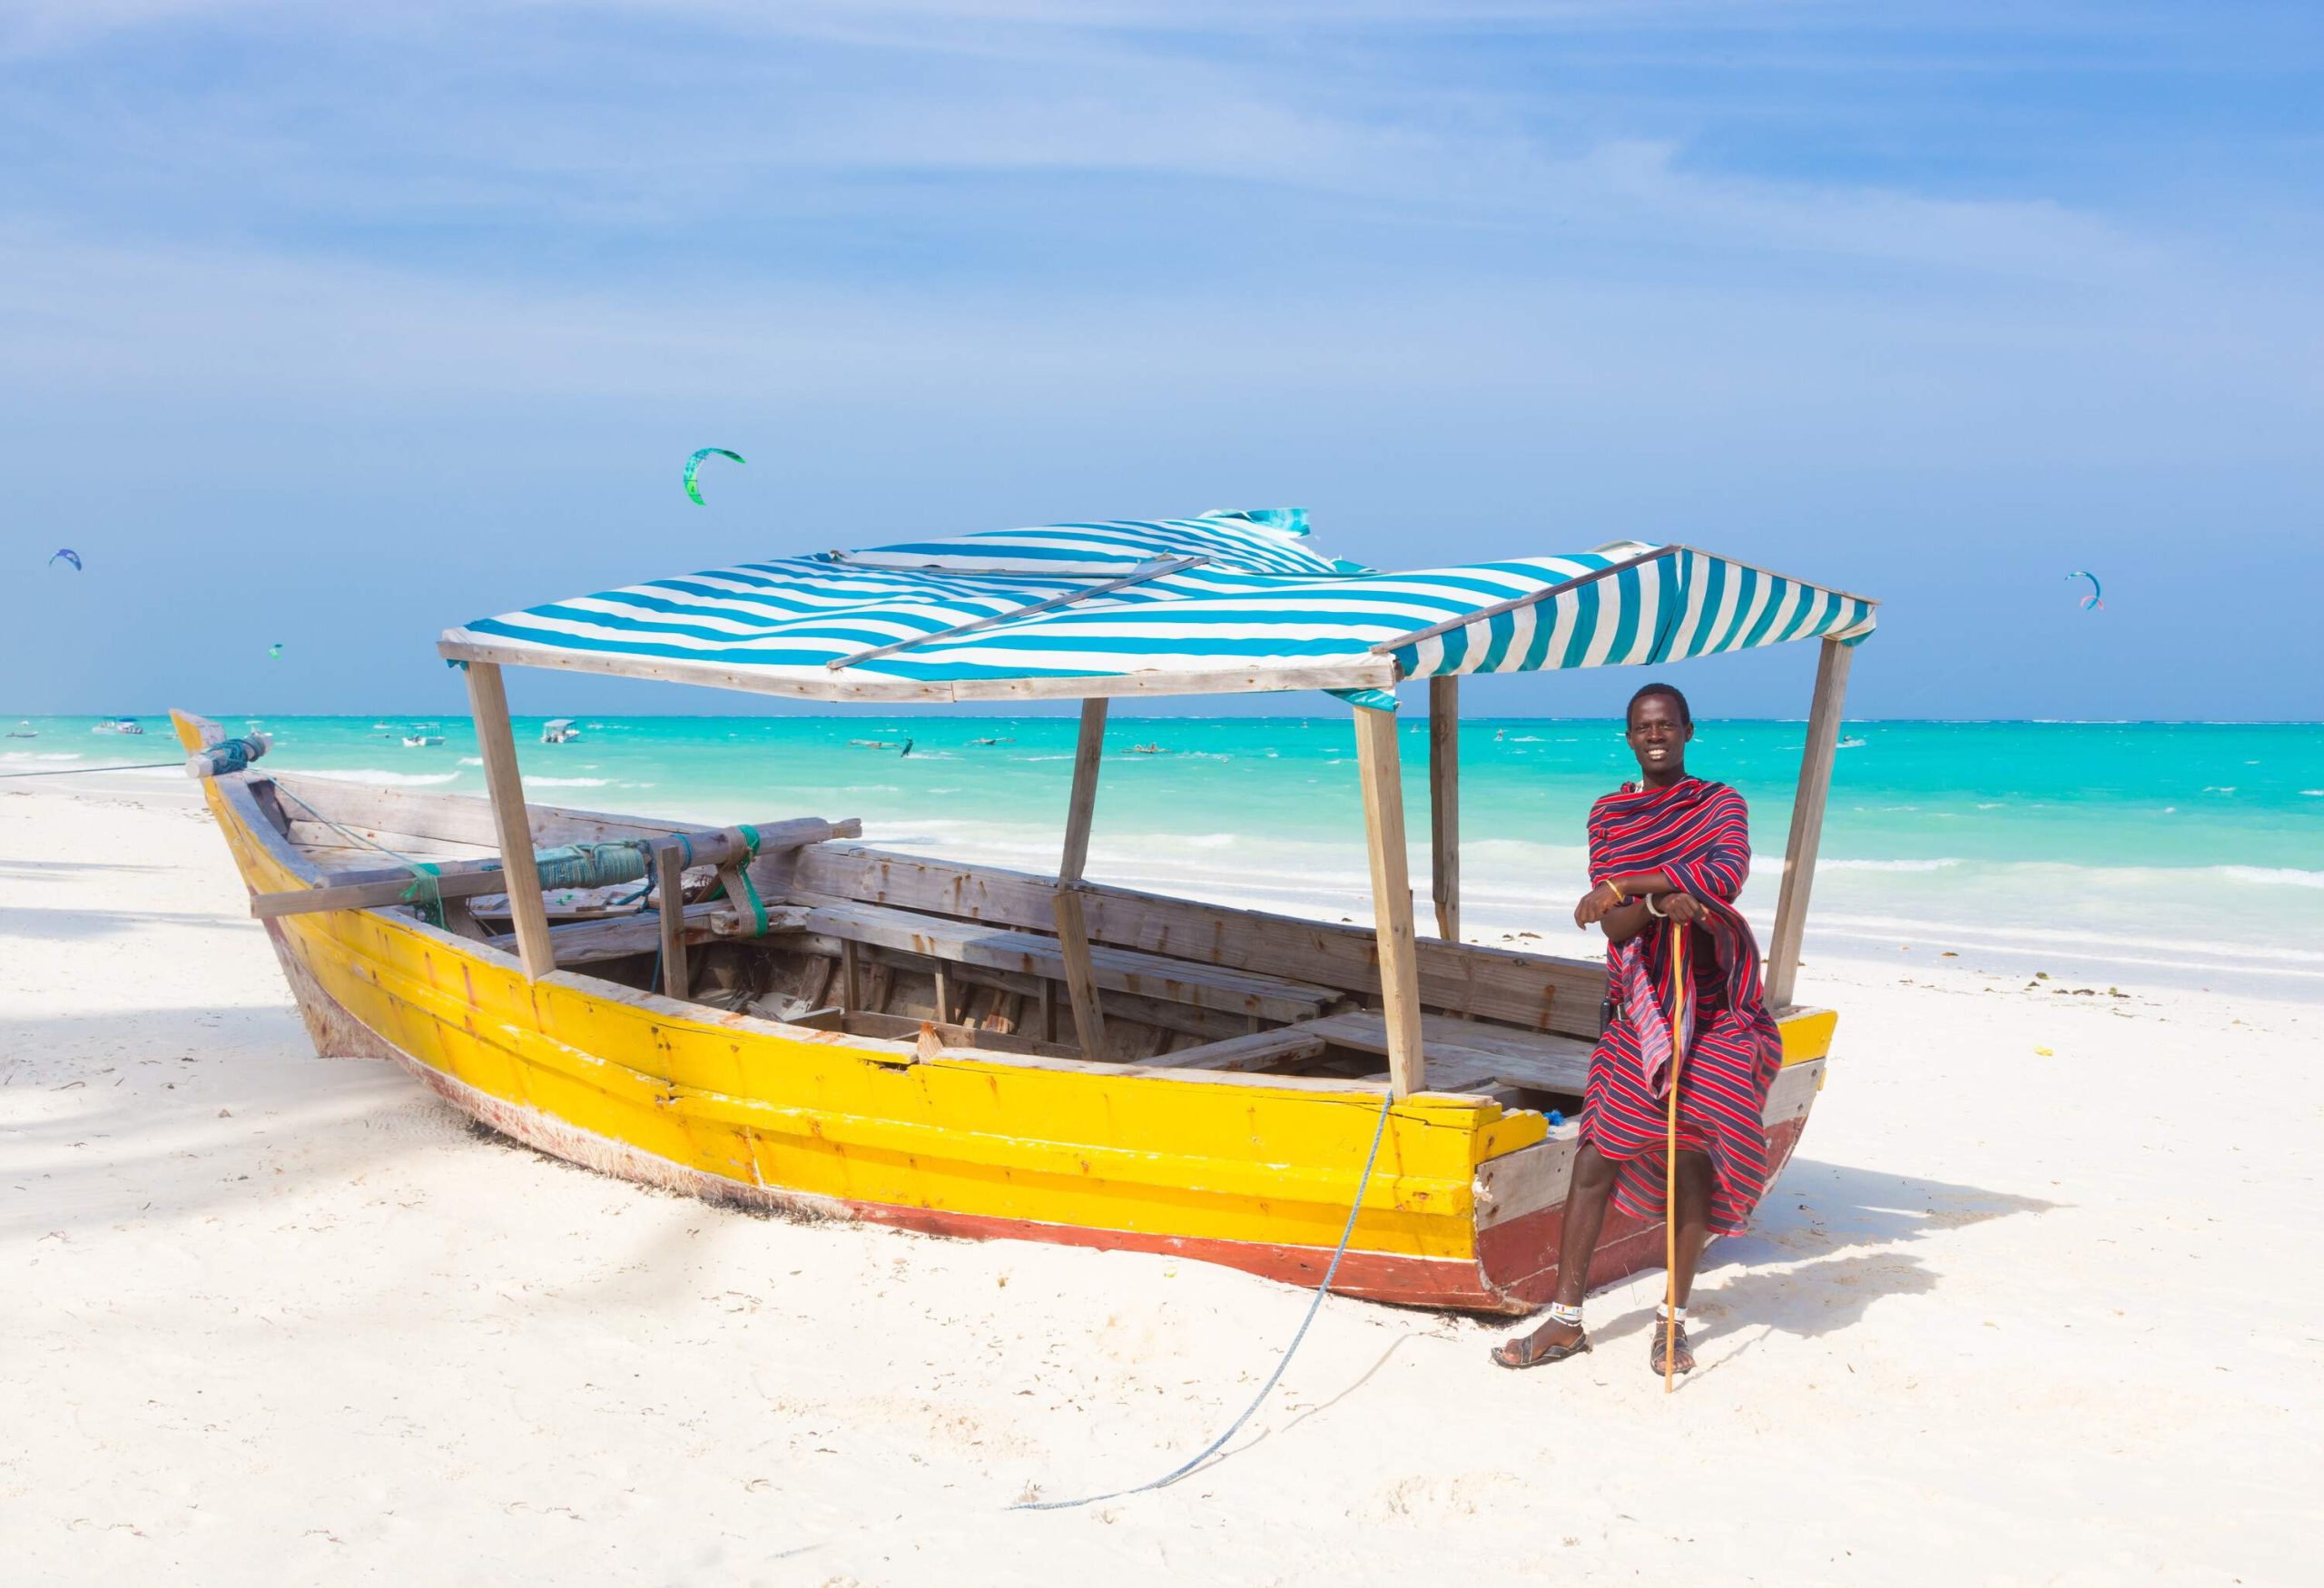 A Maasai man leans on a wooden stick, standing beside a colourful boat docked on the soft sands of the beach.